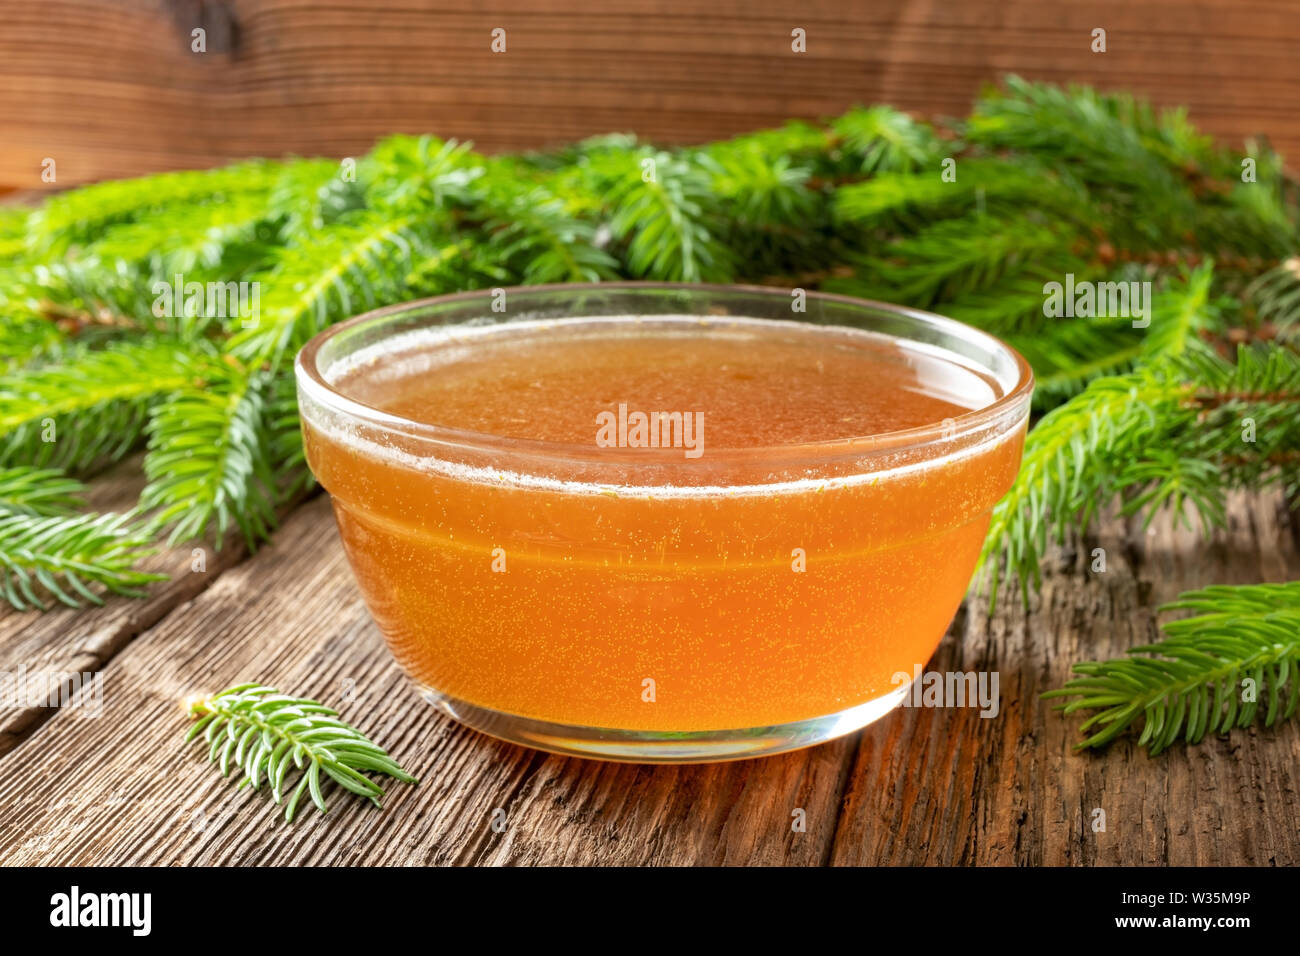 Homemade syrup against cough made from young spruce branches Stock Photo